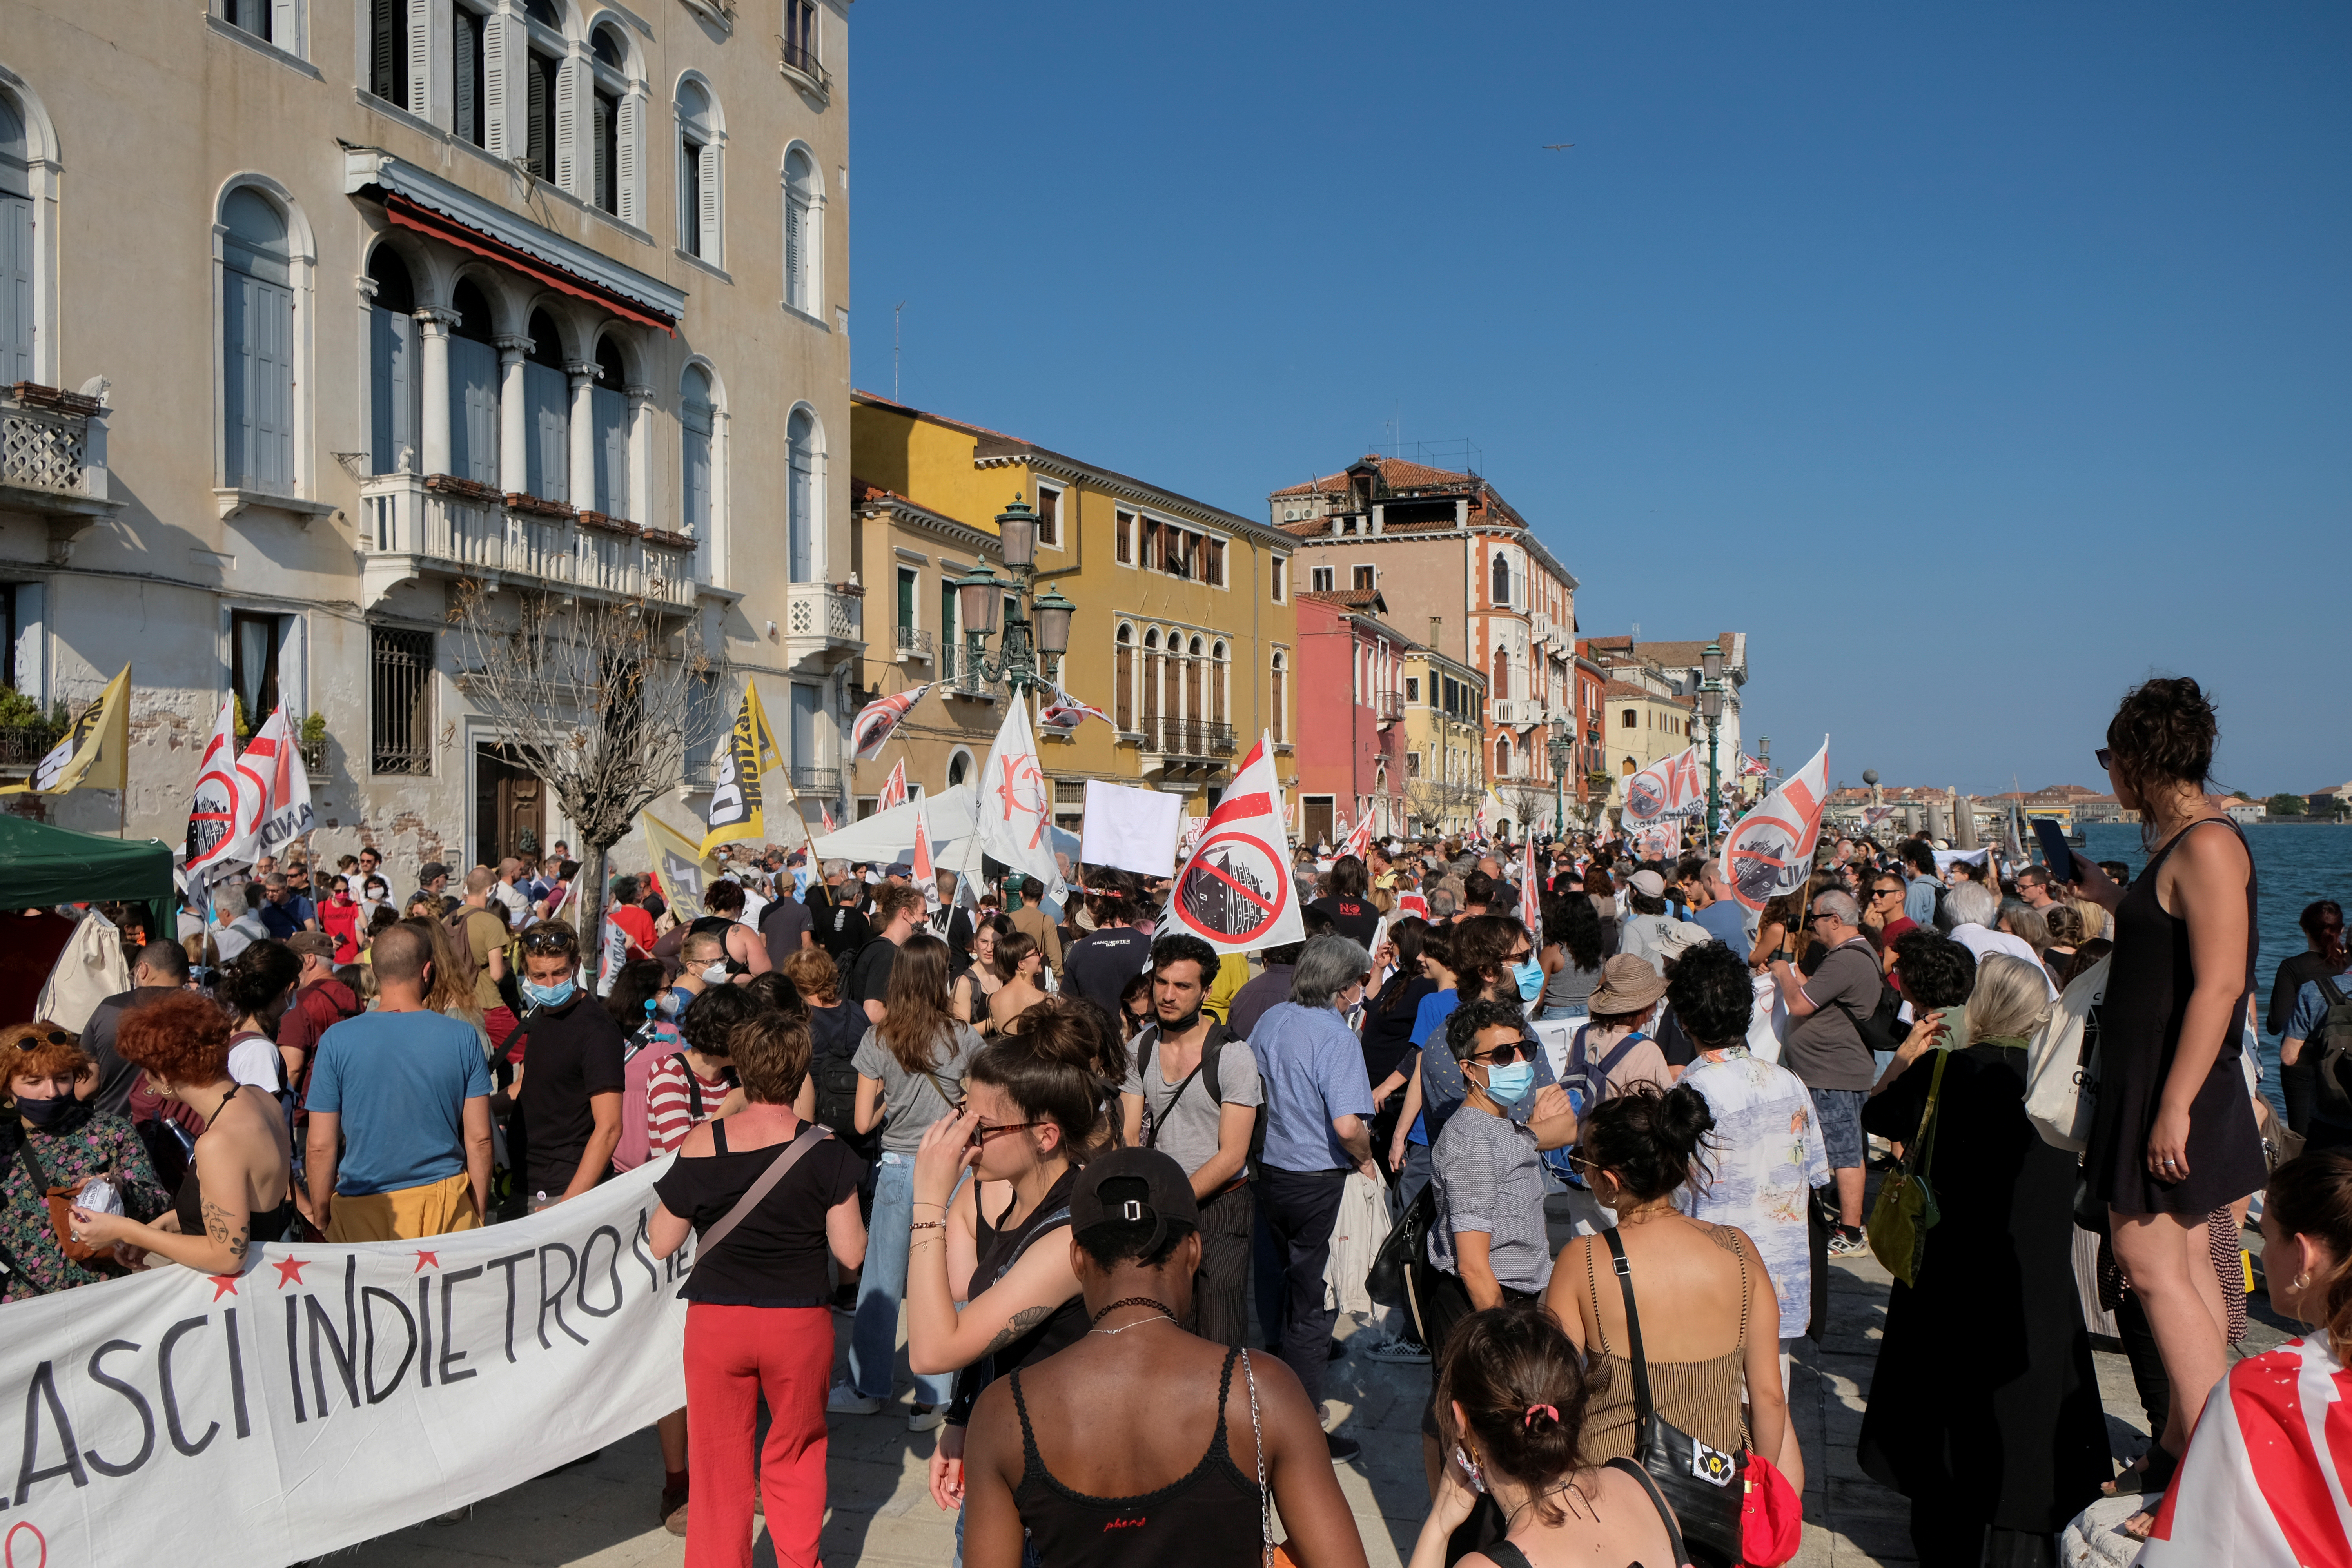 Protesters in Venice, Italy, demonstrate against mass tourism and huge cruise ships